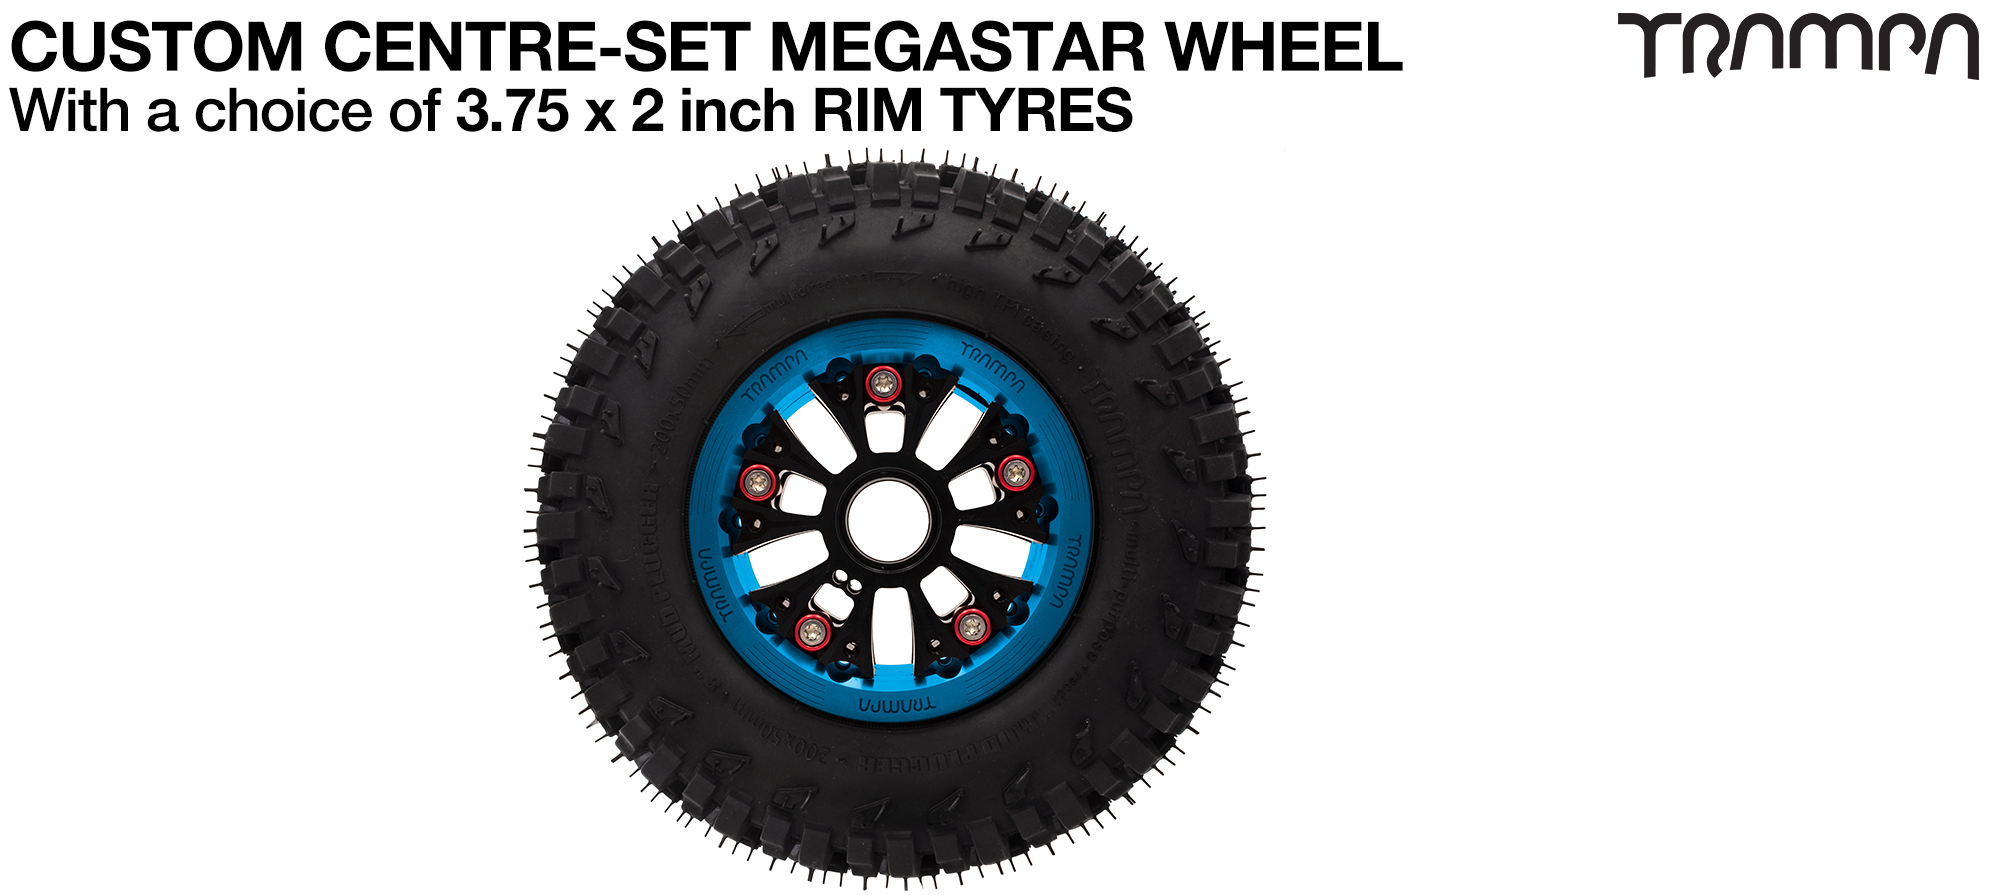 MEGASTAR 8 CENTRE-SET Wheels will fit any Tire TRAMPA offers up to 8 inches in Diameter 